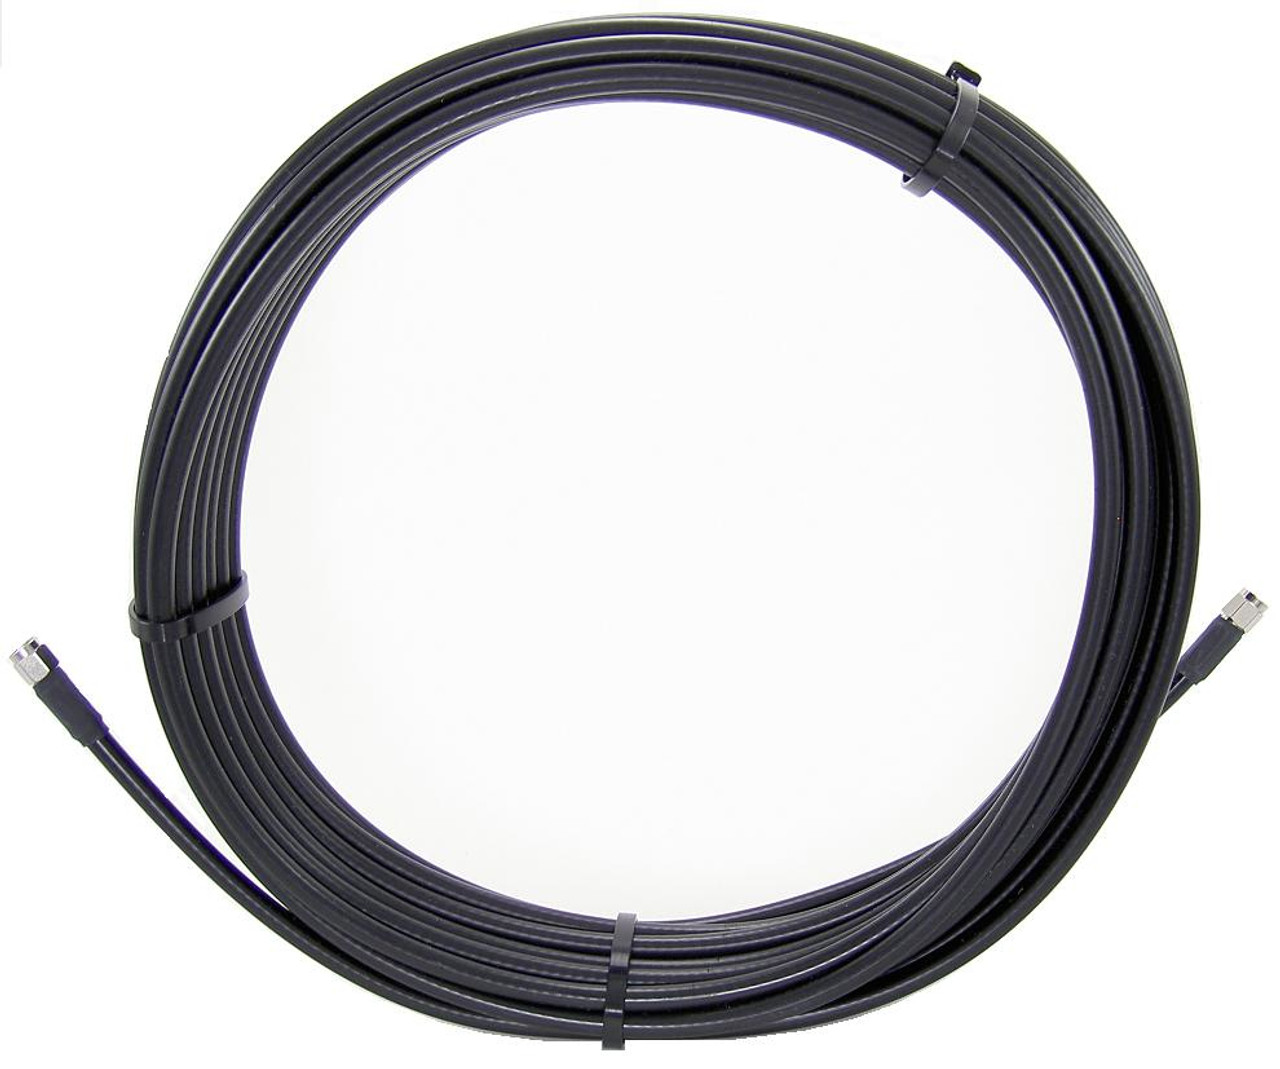 Cab-L400-50-Tnc-N | Cisco | 50-Ft (15M) Ultra Low Loss Lmr 400 Cable Tnc-N Connector